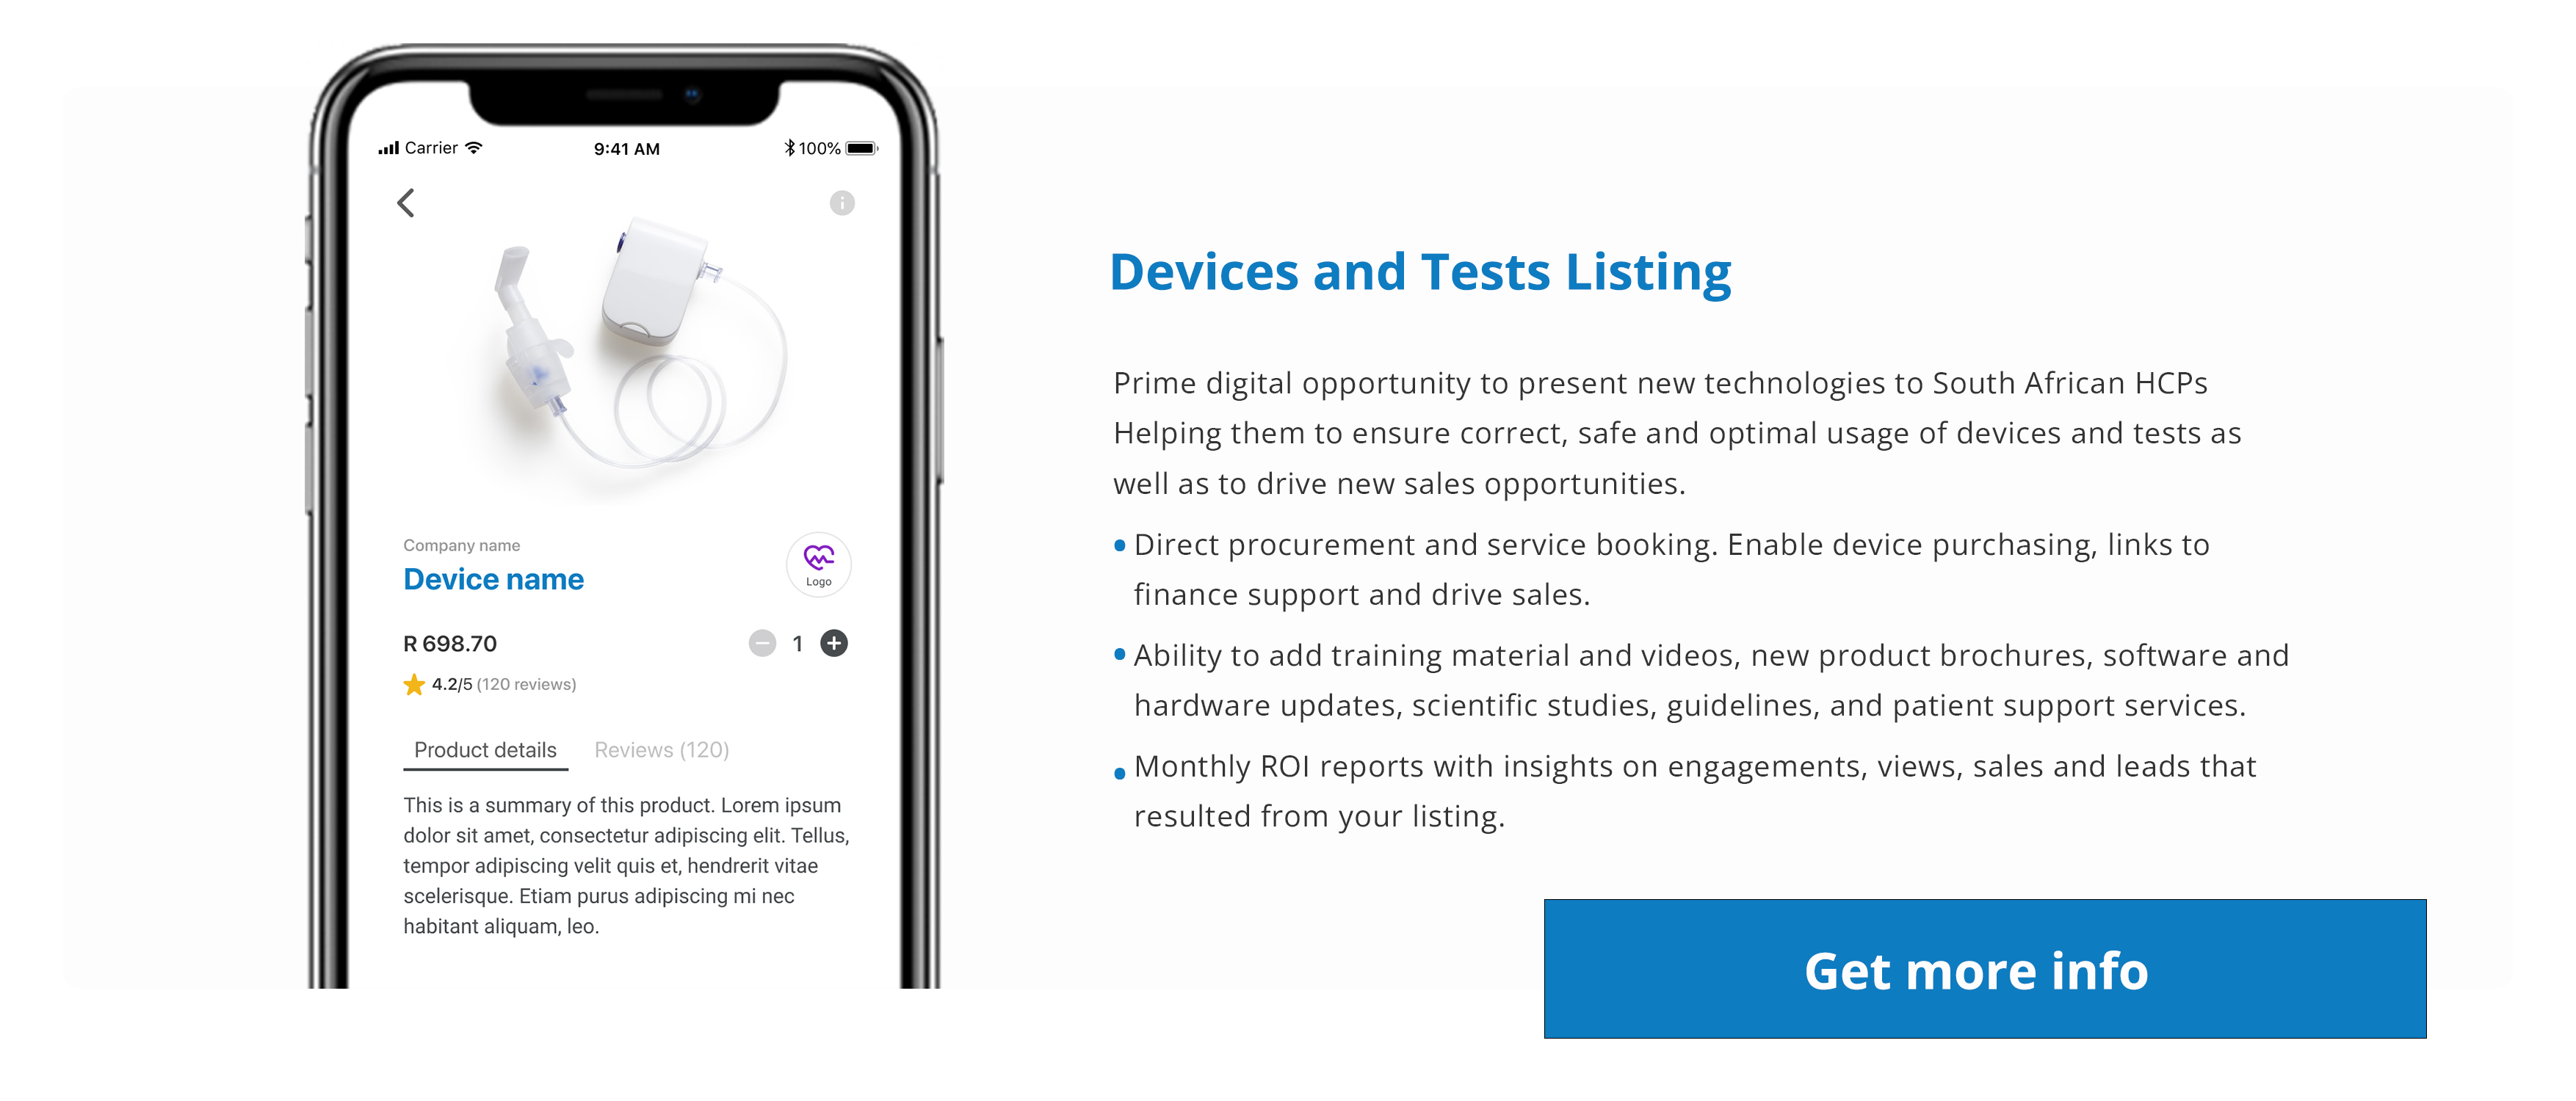 Devices and Tests Listing